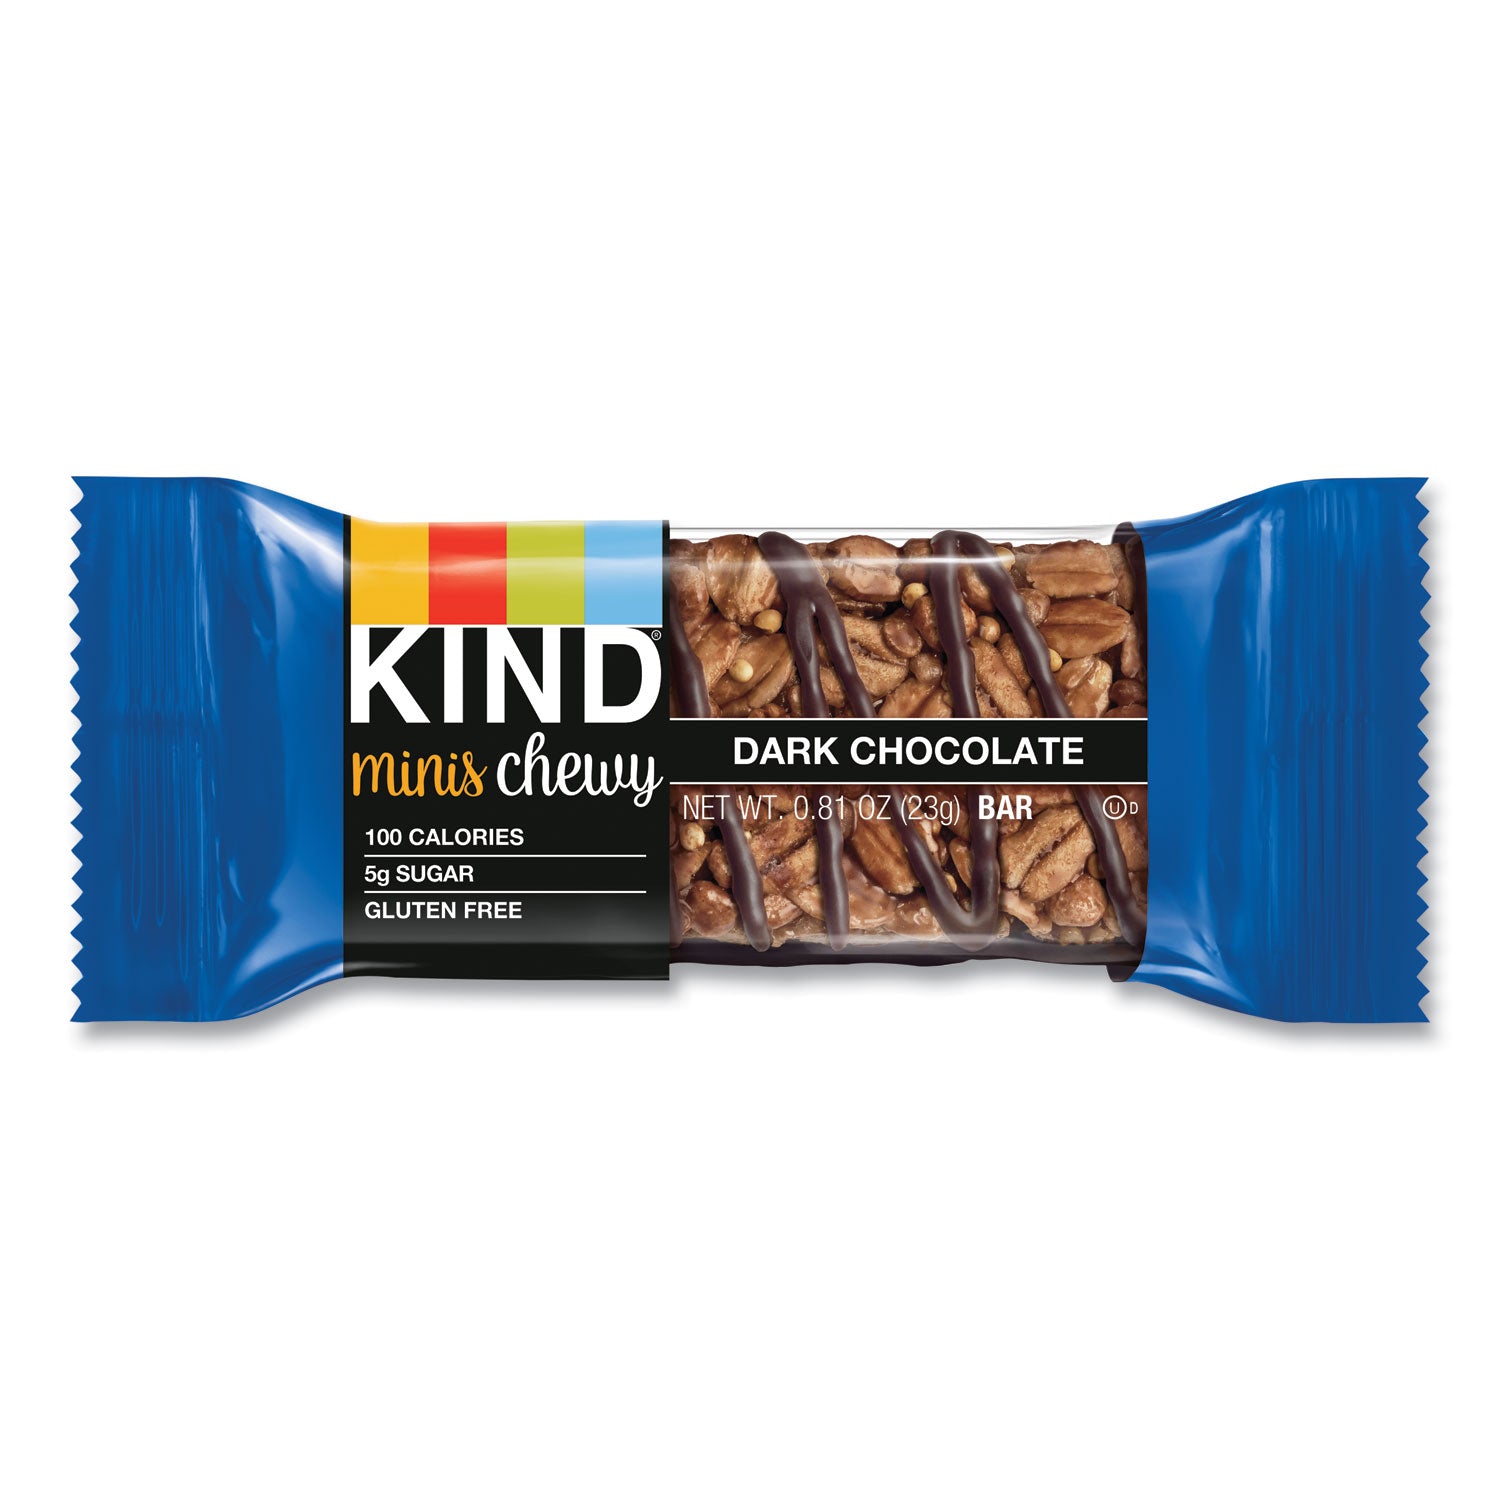 minis-chewy-dark-chocolate-081-oz10-pack_knd27896 - 2